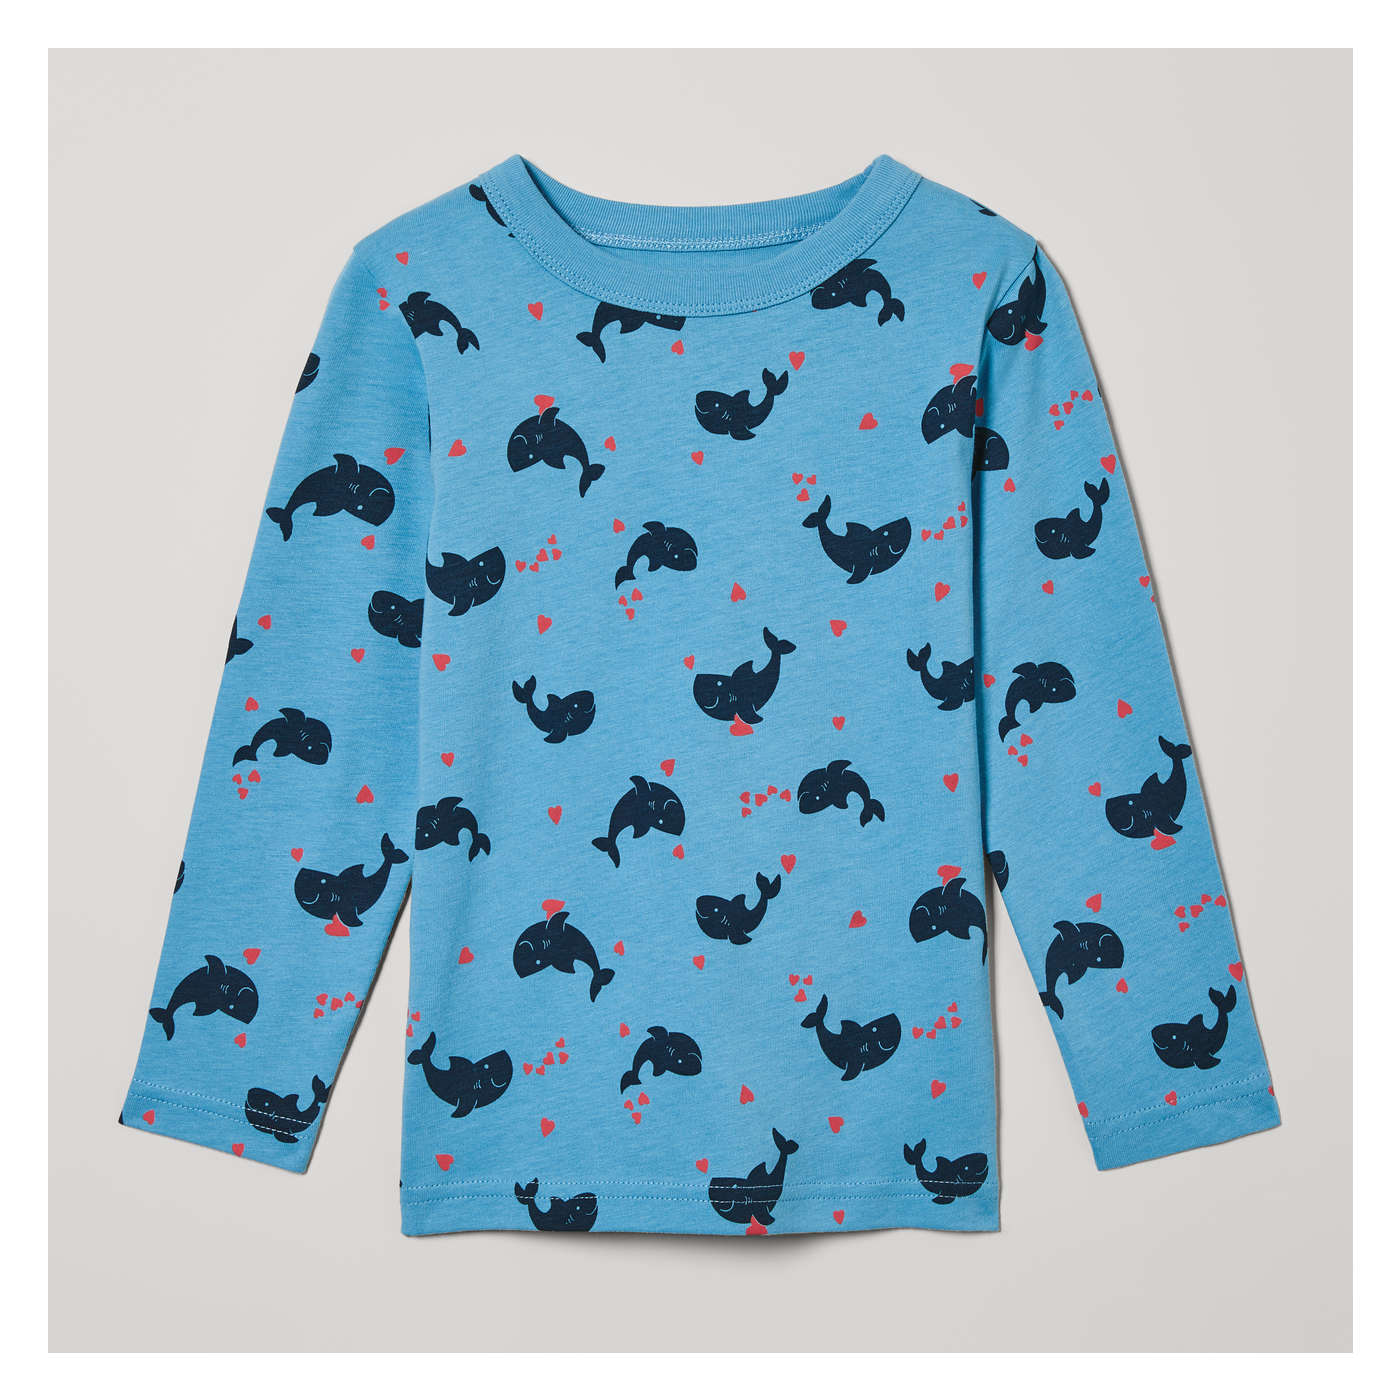 Youth & Toddler Long Sleeve Cotton Tee - Headed South - Sky Blue